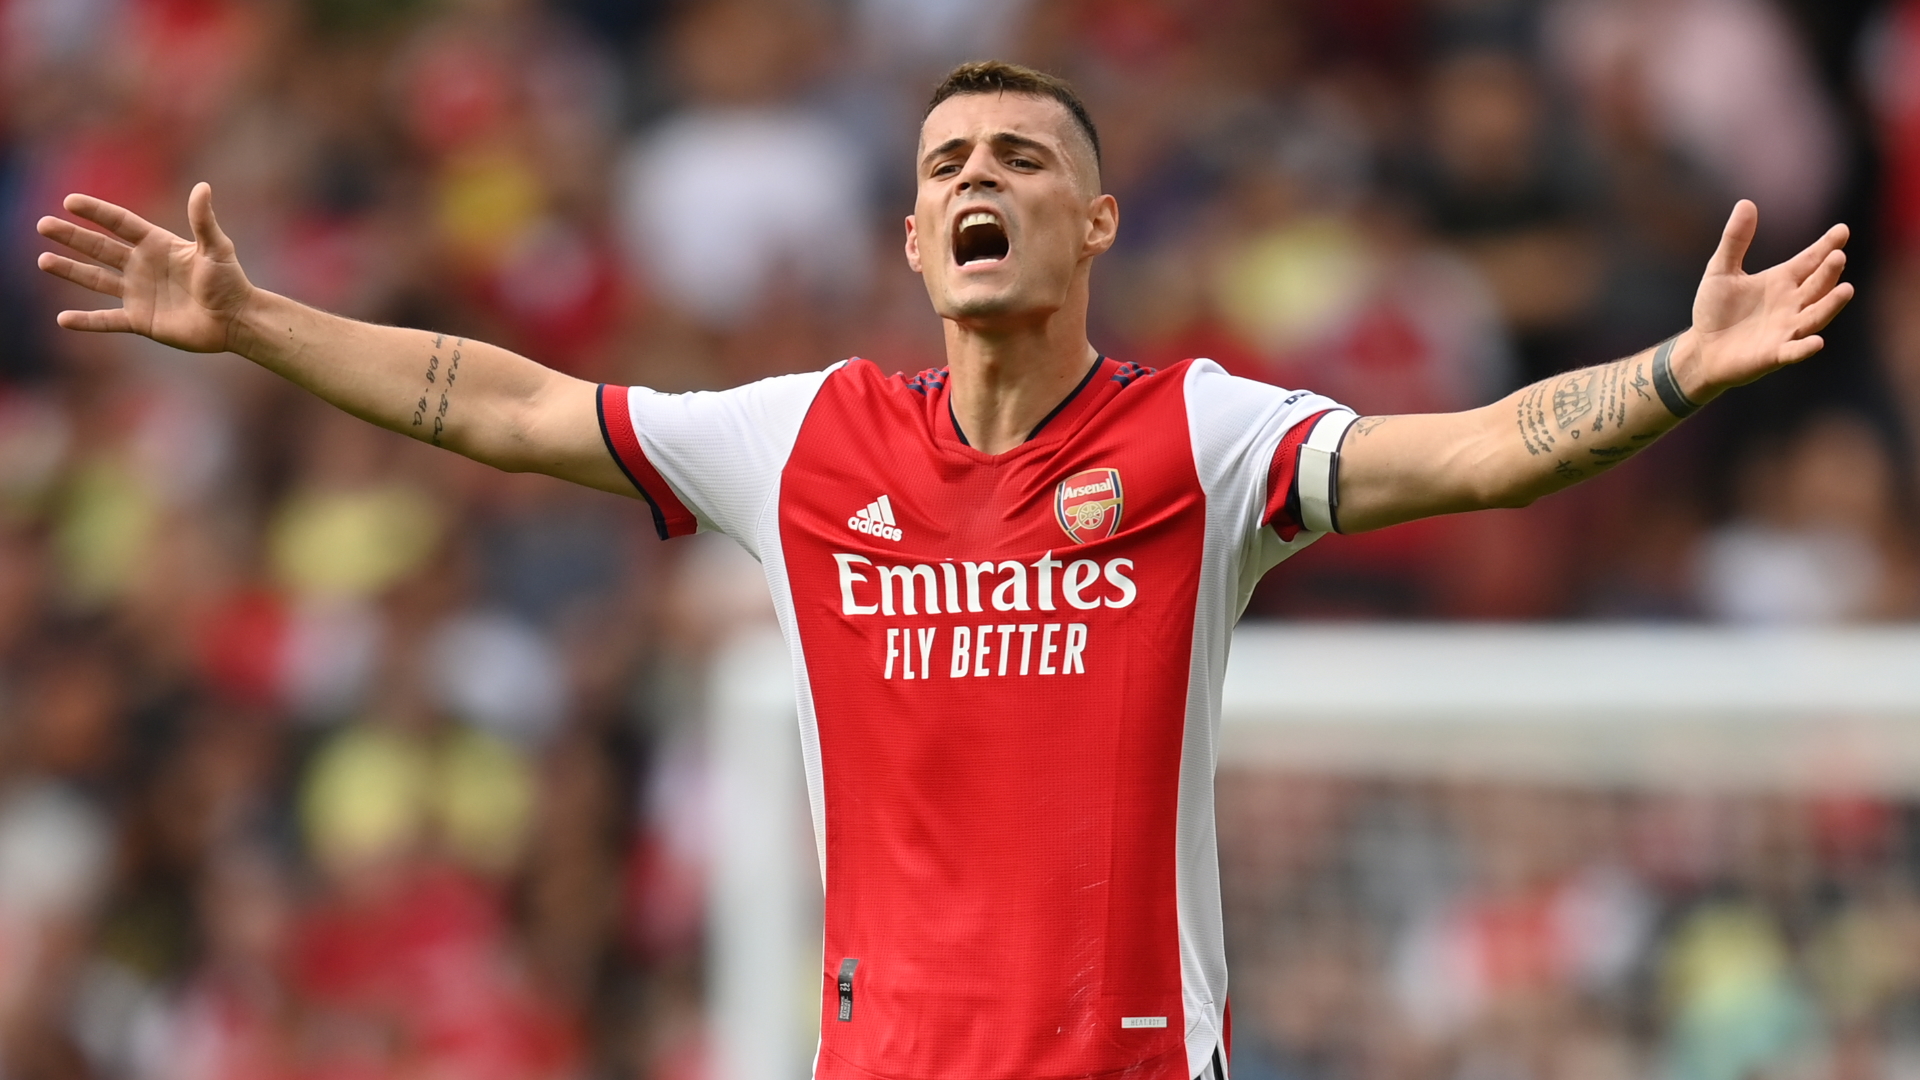 Arsenal dealt blow as Xhaka ruled out for three months with knee injury